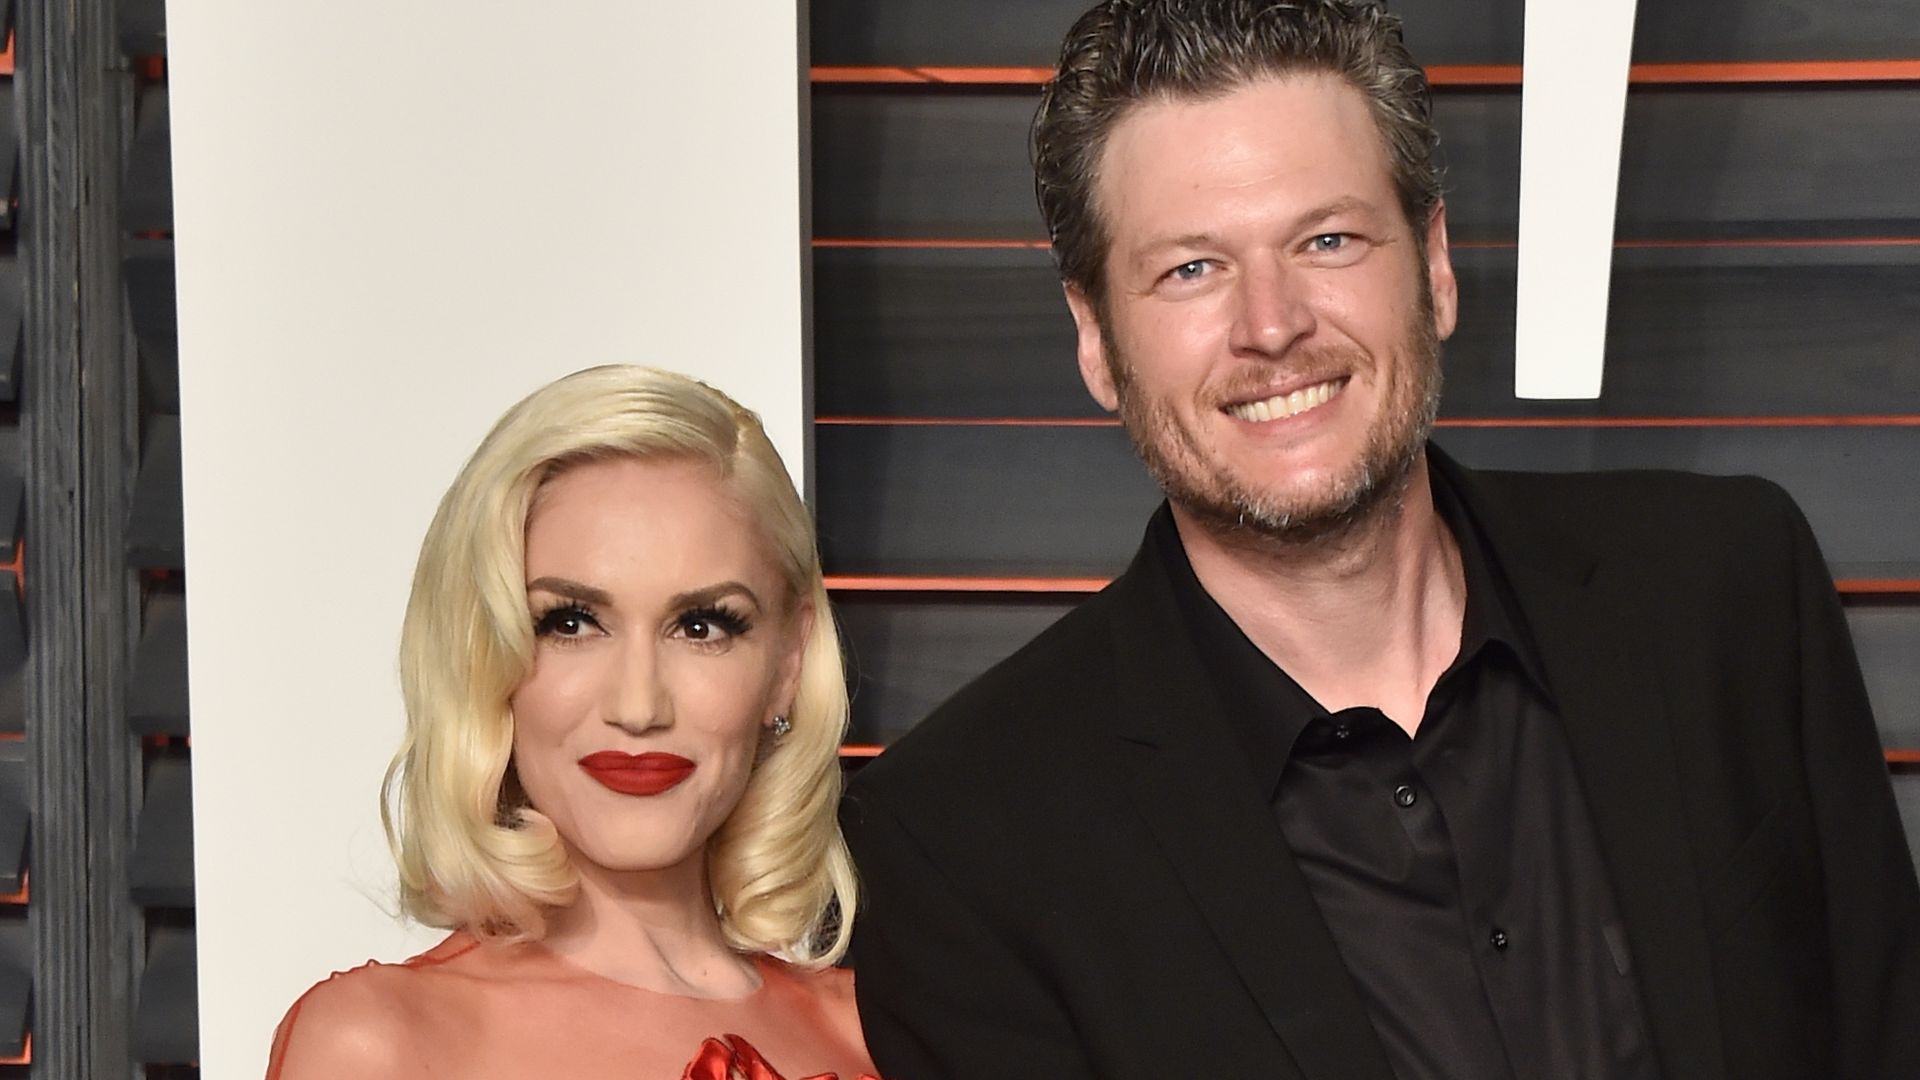 Gwen Stefani in a red dress with Blake Shelton in a black suit